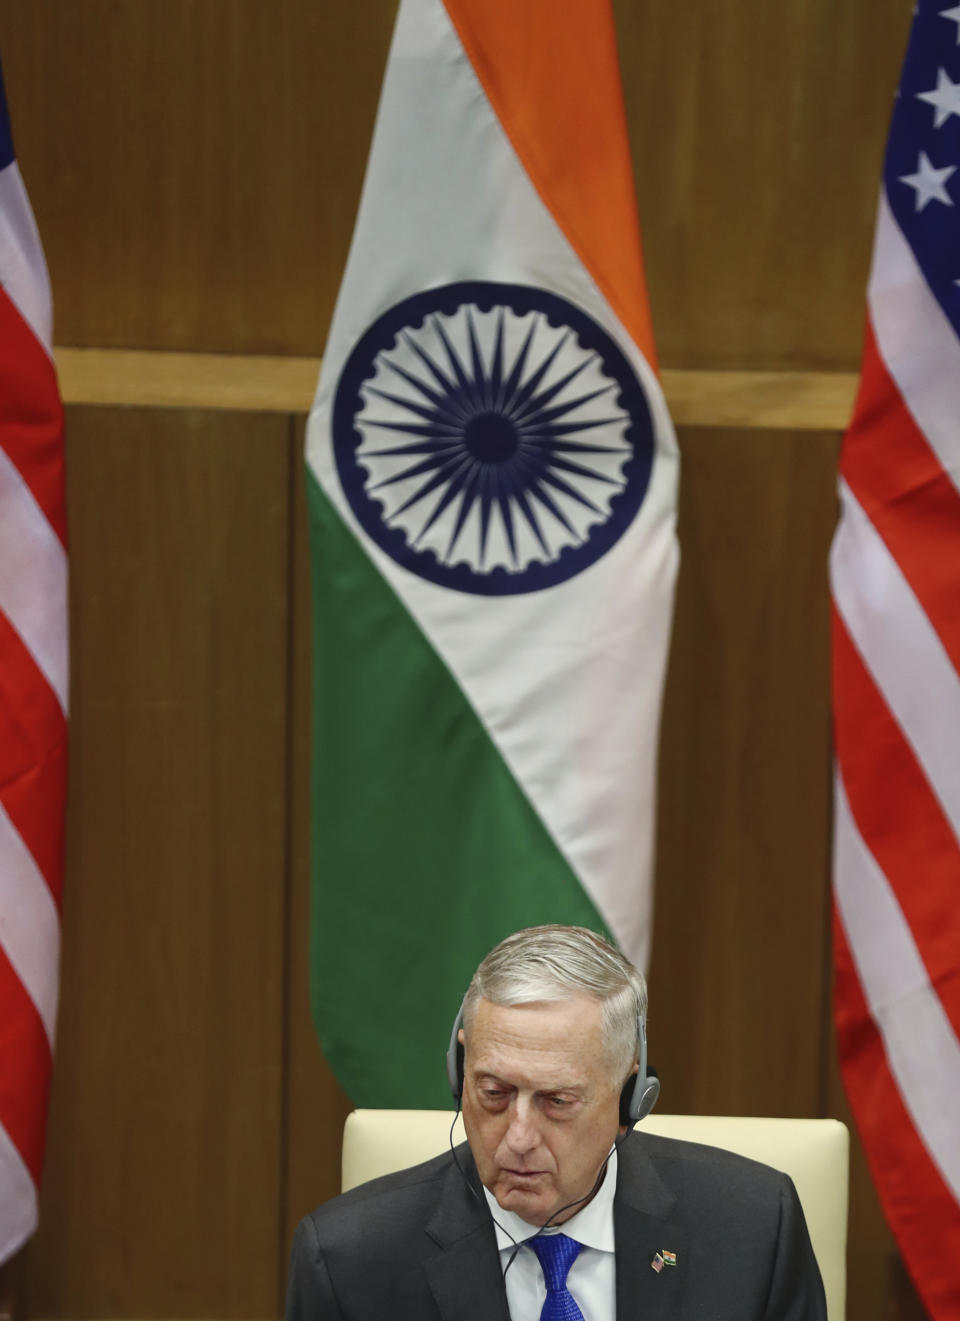 U.S. Defense Secretary James Mattis, listens to the press statement made by Indian Foreign Minister Sushma Swaraj after the so-called "2+2" talks in New Delhi, India, Thursday, Sept. 6, 2018. U.S. Pompeo and Mattis held long-delayed talks Thursday with top Indian officials, looking to shore up the alliance with one of Washington's top regional partners. (AP Photo/Manish Swarup)